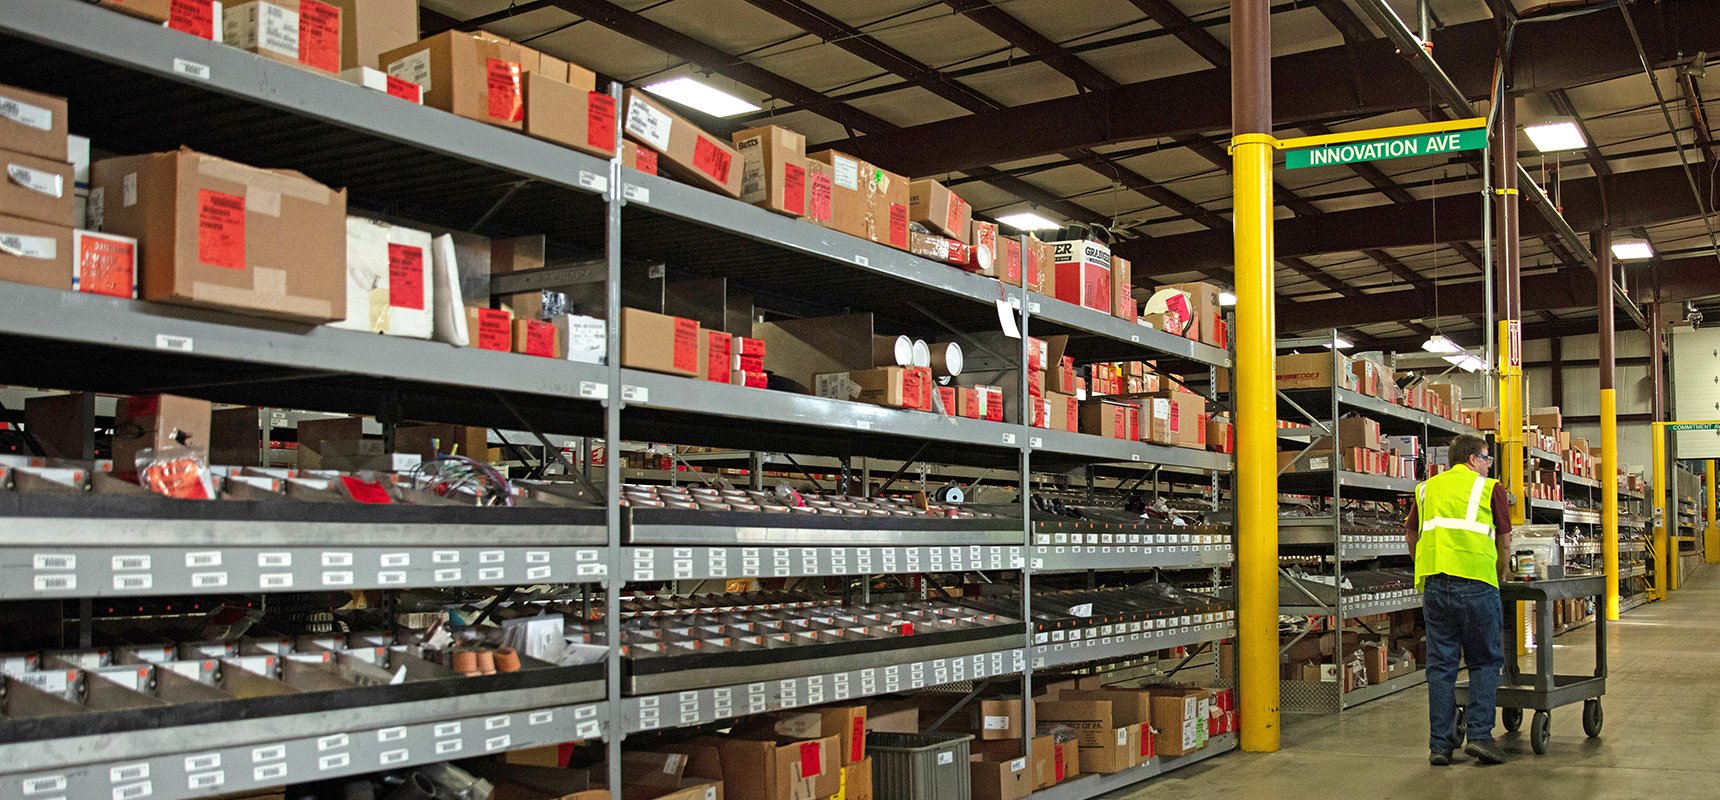 Pierce product support supply warehouse with shelves stocked full of boxes, showing an employee pushing a cart of parts down an aisle. 